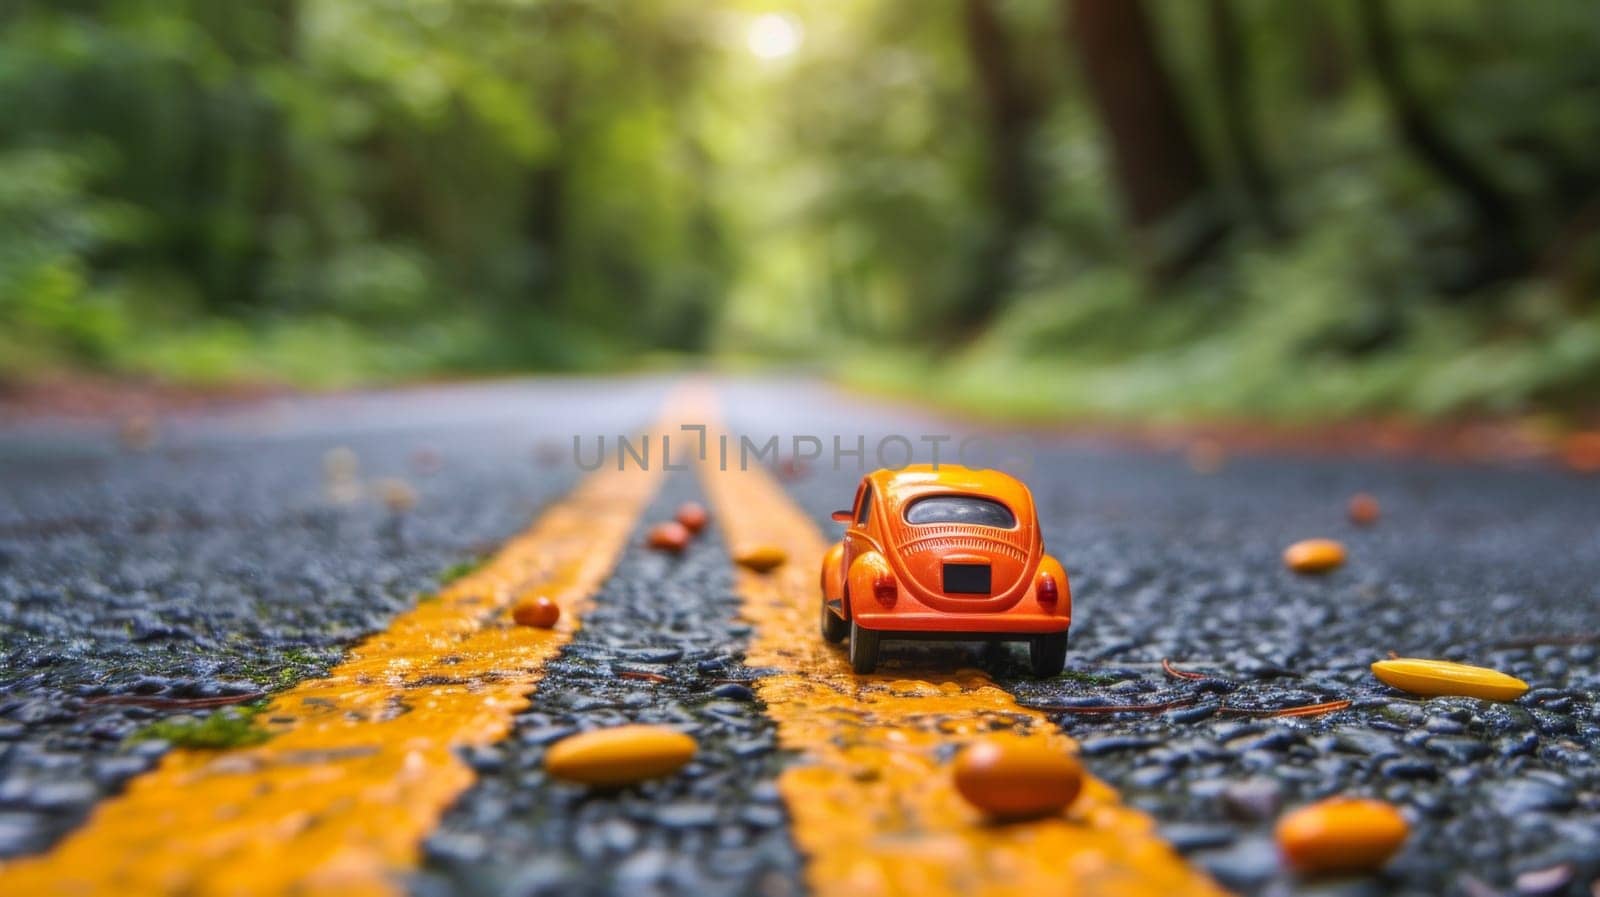 A toy car is driving down a road with orange pebbles